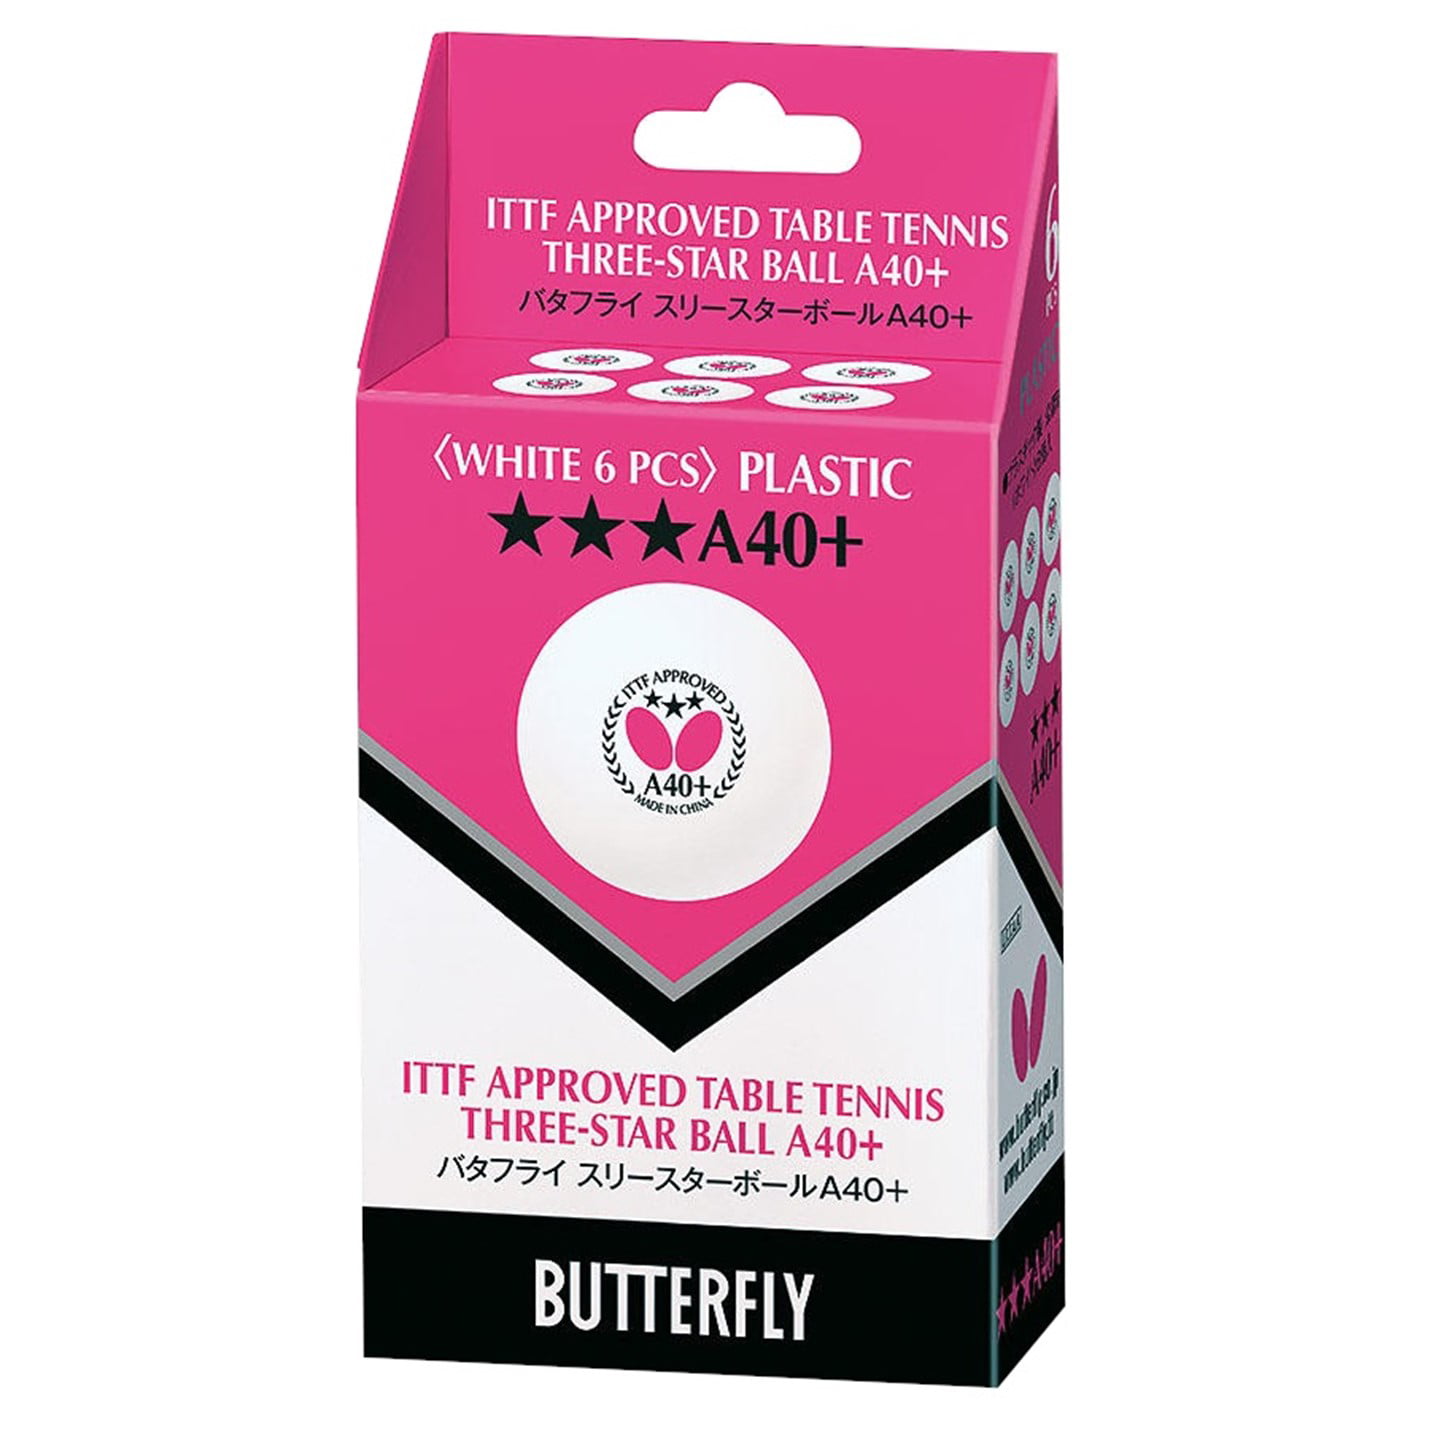 Butterfly A40+ 3 Star Table Tennis Balls Poly 3 White 40Mm Ittf Approved 